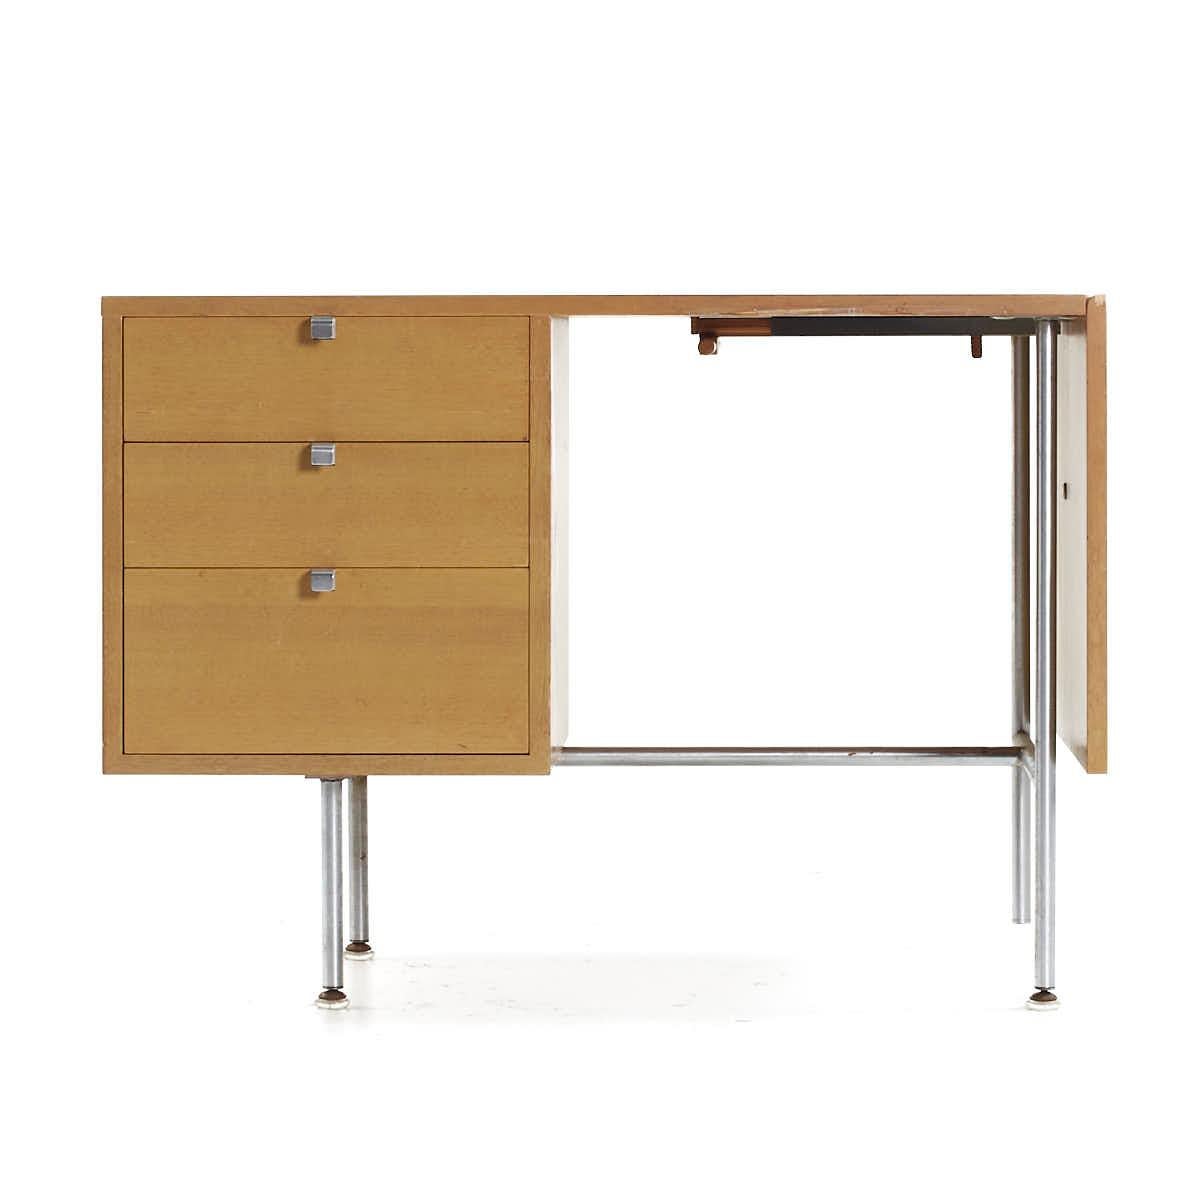 George Nelson for Herman Miller Mid Century Drop Side Desk

This desk measures: 40 wide x 24 deep x 28.75 inches high, with a chair clearance of 27.75 inches; the drop side is 18.25 inches wide, making a maximum desk width of 58.25 inches when the